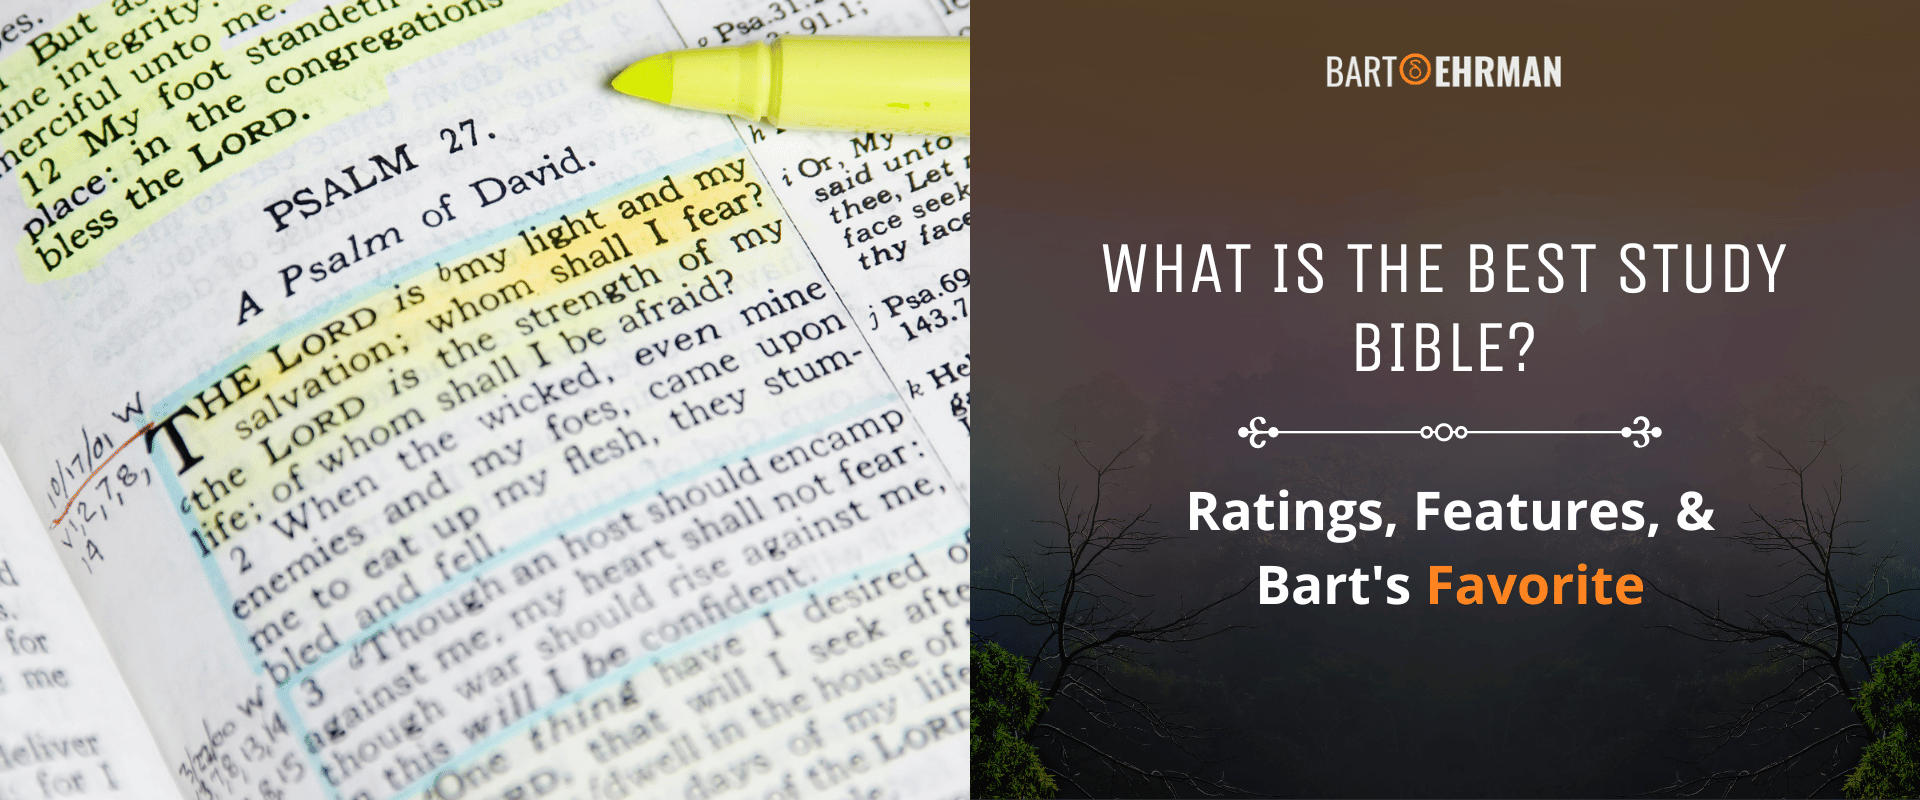 What is the Best Study Bible_ - Ratings, Features, & Bart's Favorite